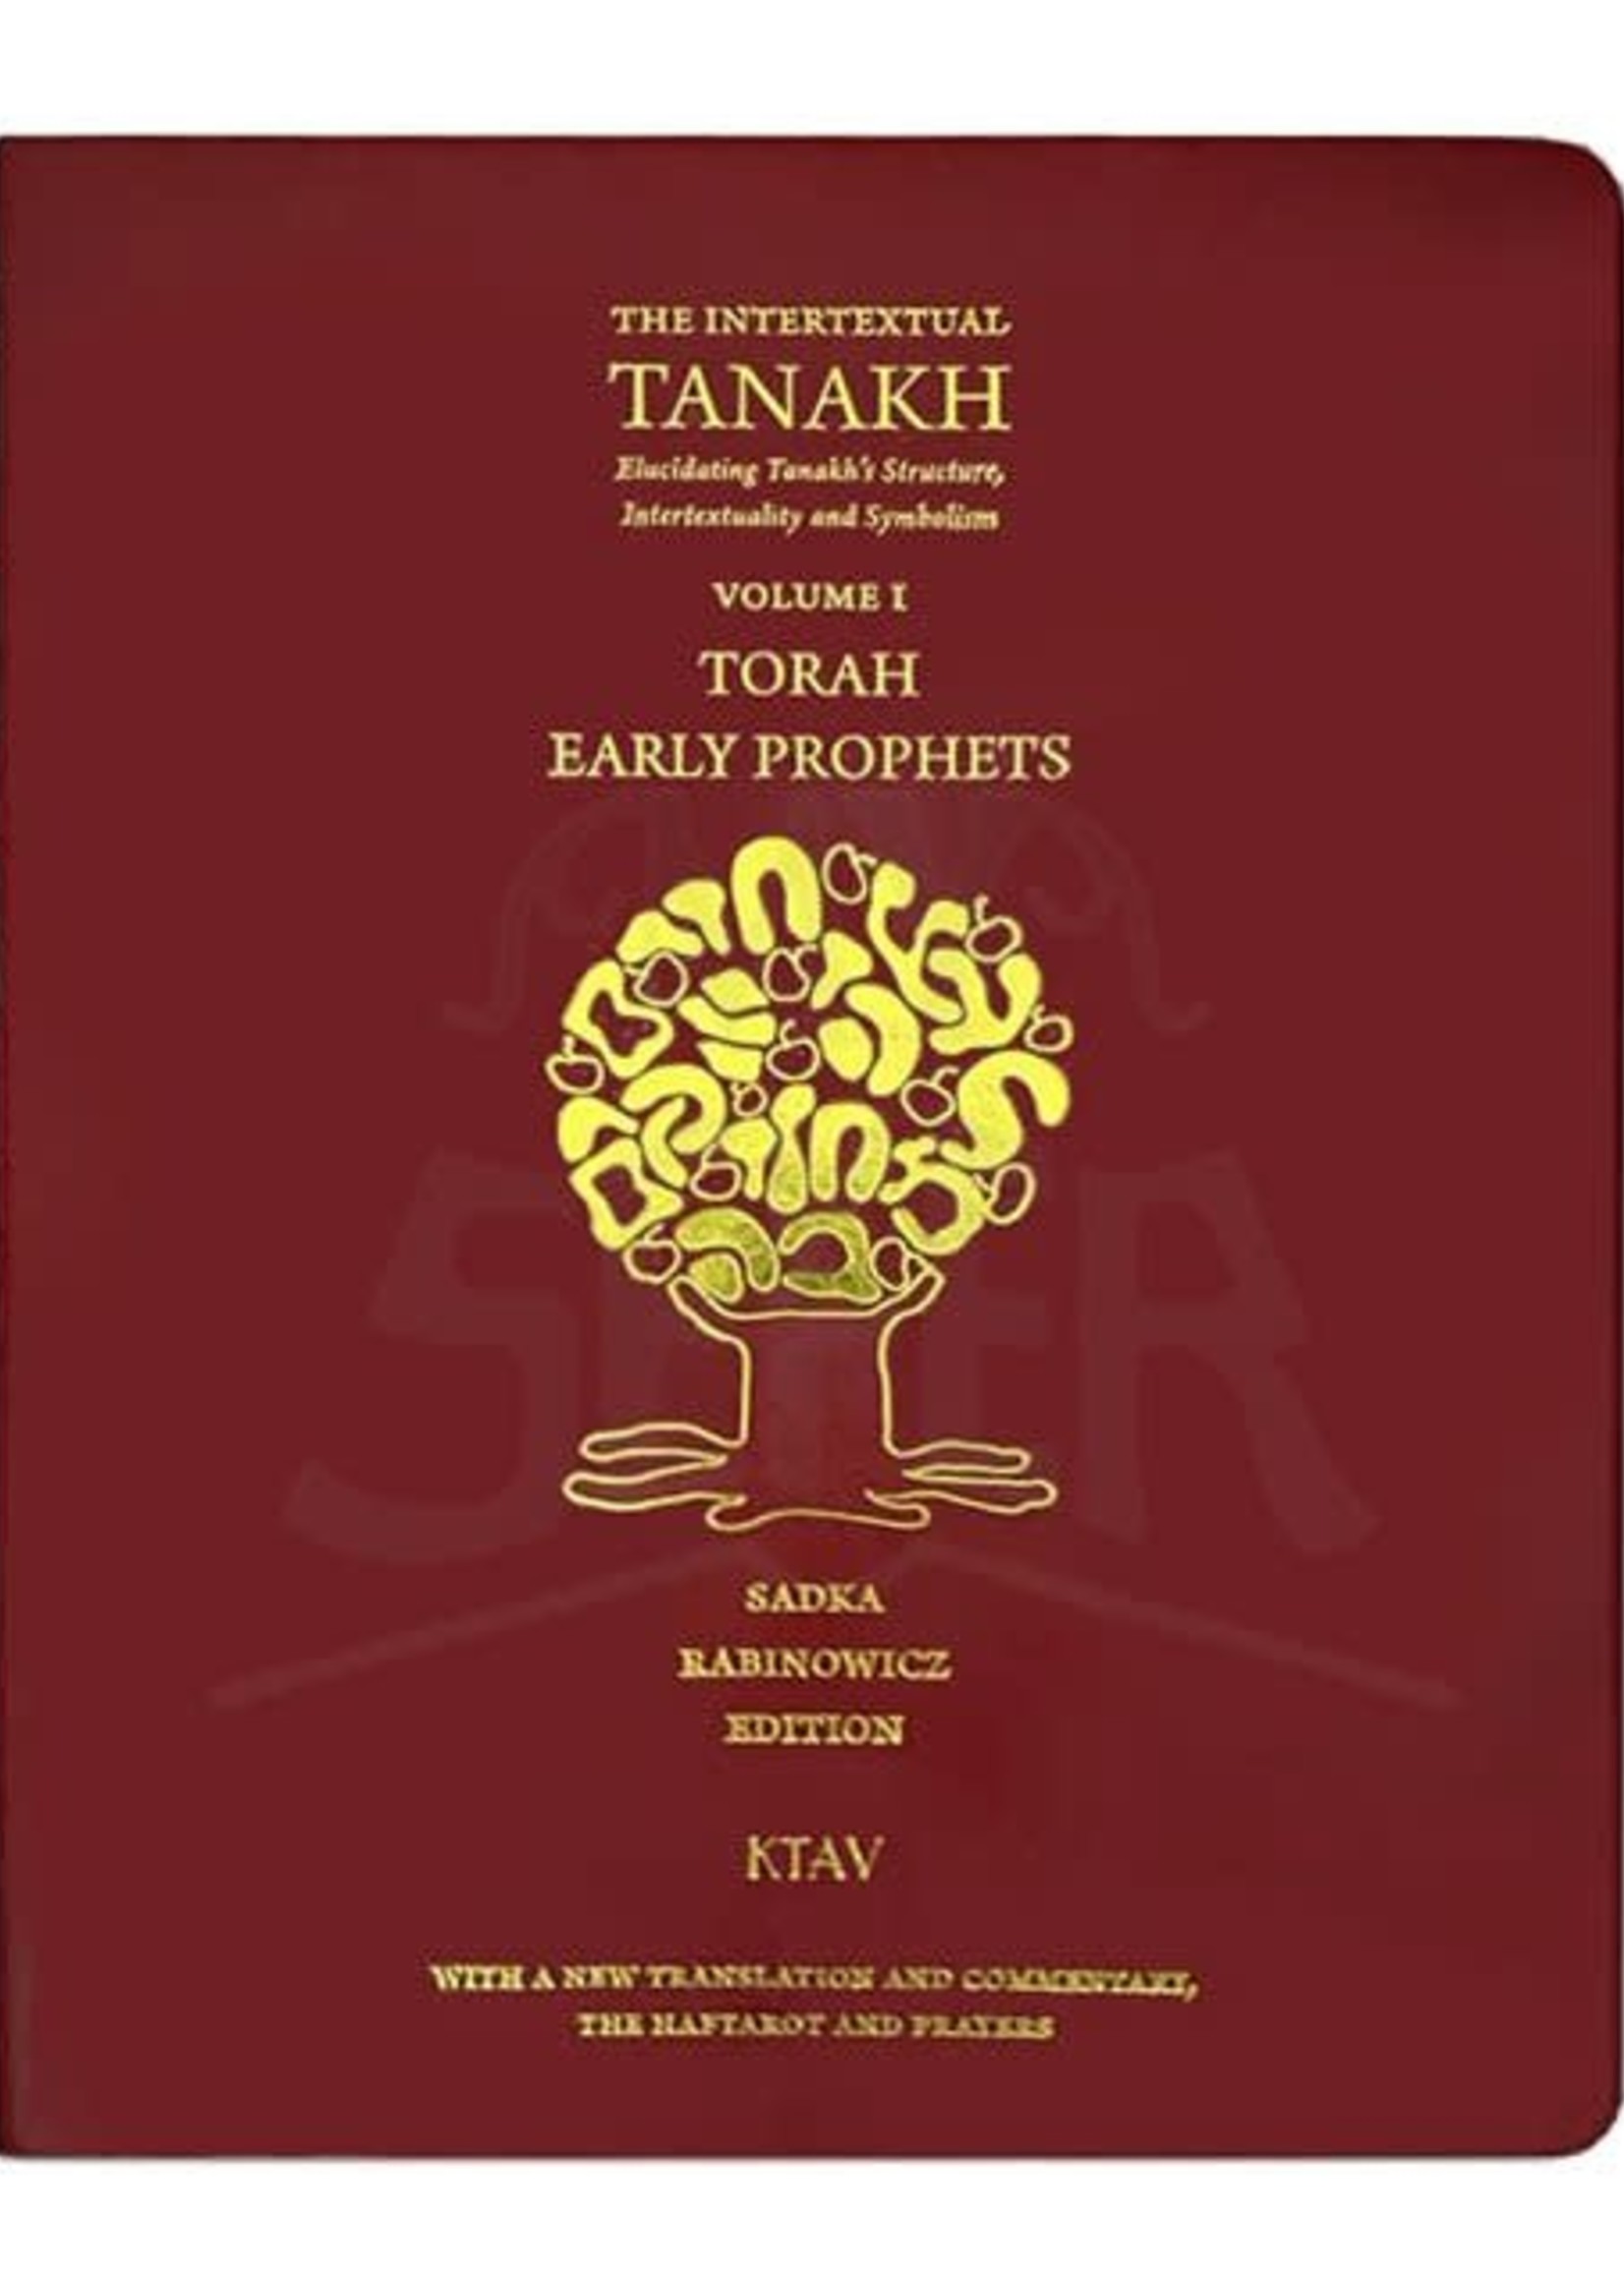 Saul Sadka THE INTERTEXTUAL TANAKH - ELUCIDATING TANAKH'S STRUCTURE, INTERTEXTUALITY AND SYMBOLISM - VOLUME 1 - TORAH, EARLY PROPHETS